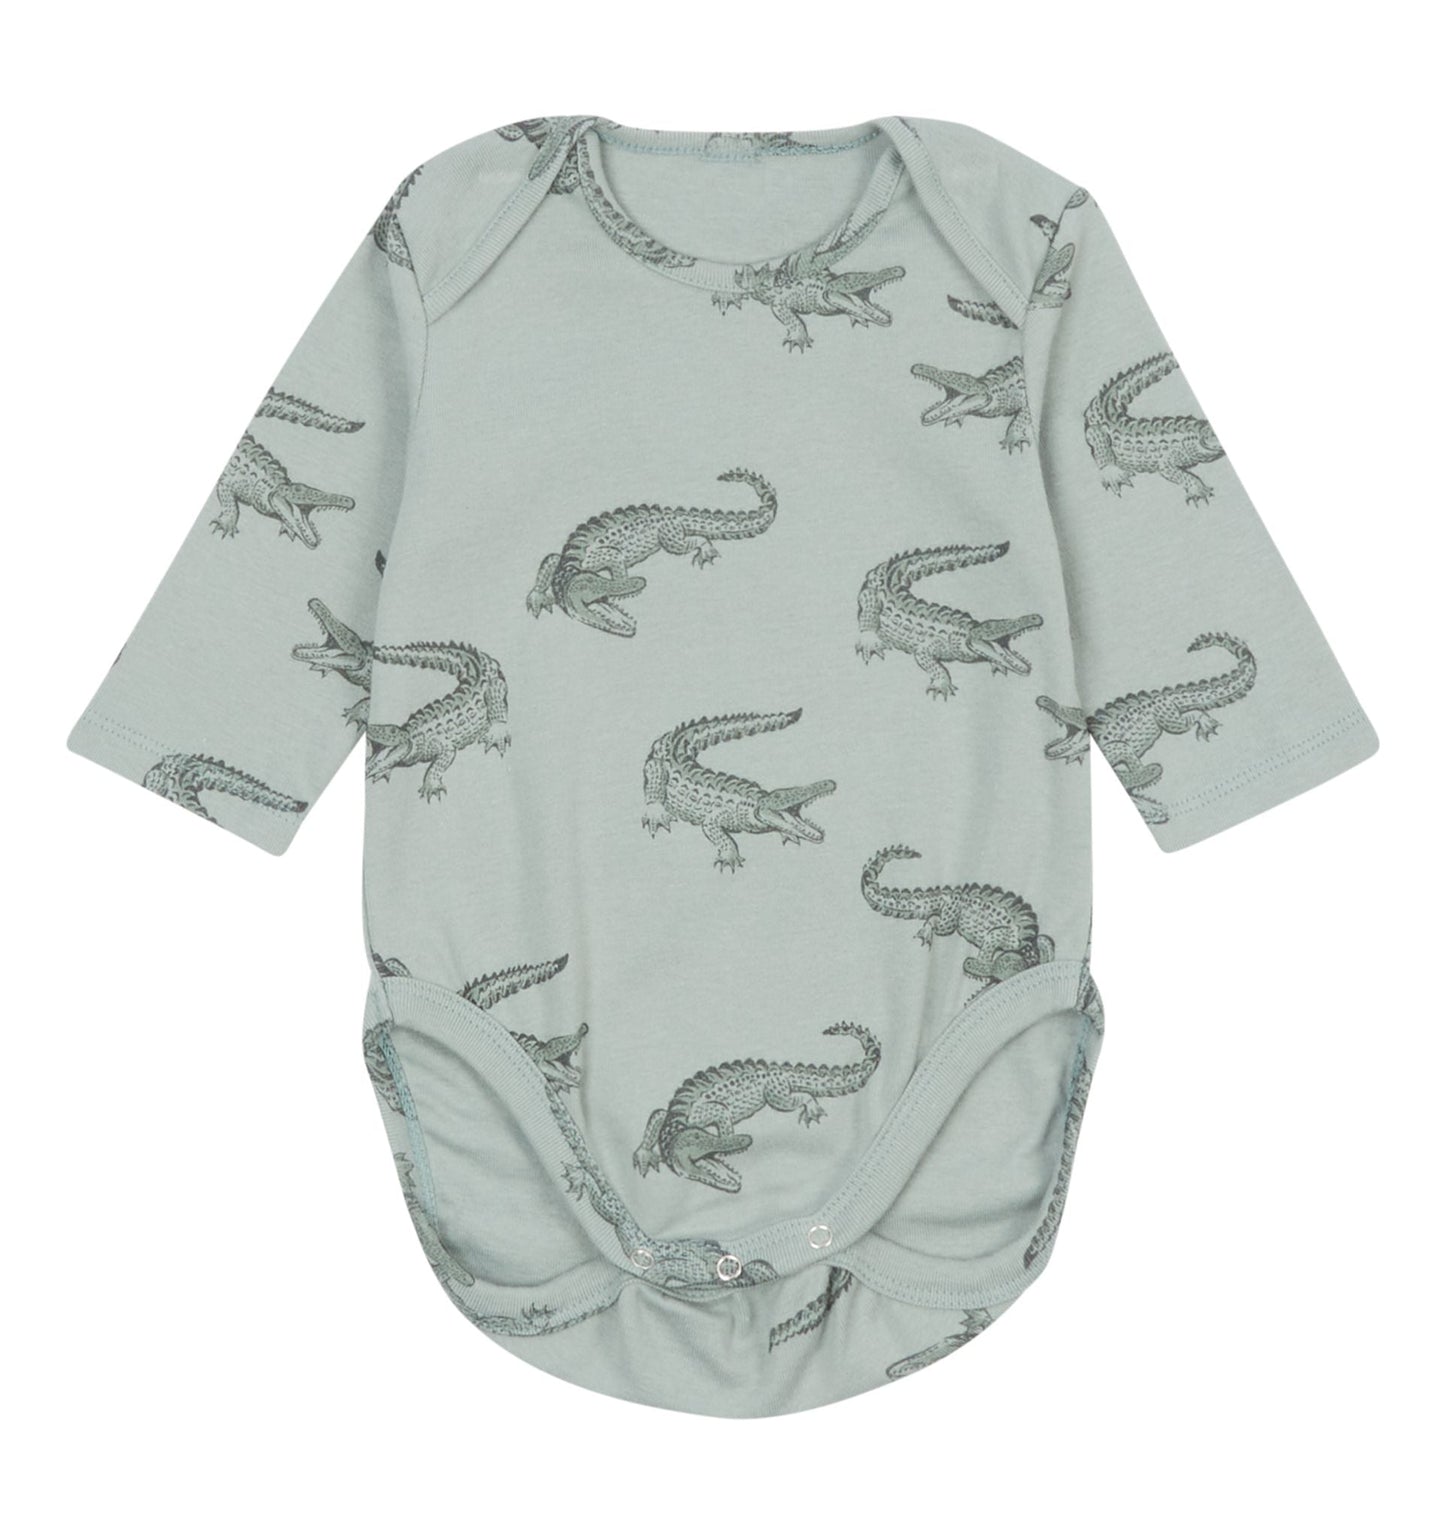 The sage green baby bodysuit with three quarter sleeves and crocodile outline print against a white background.